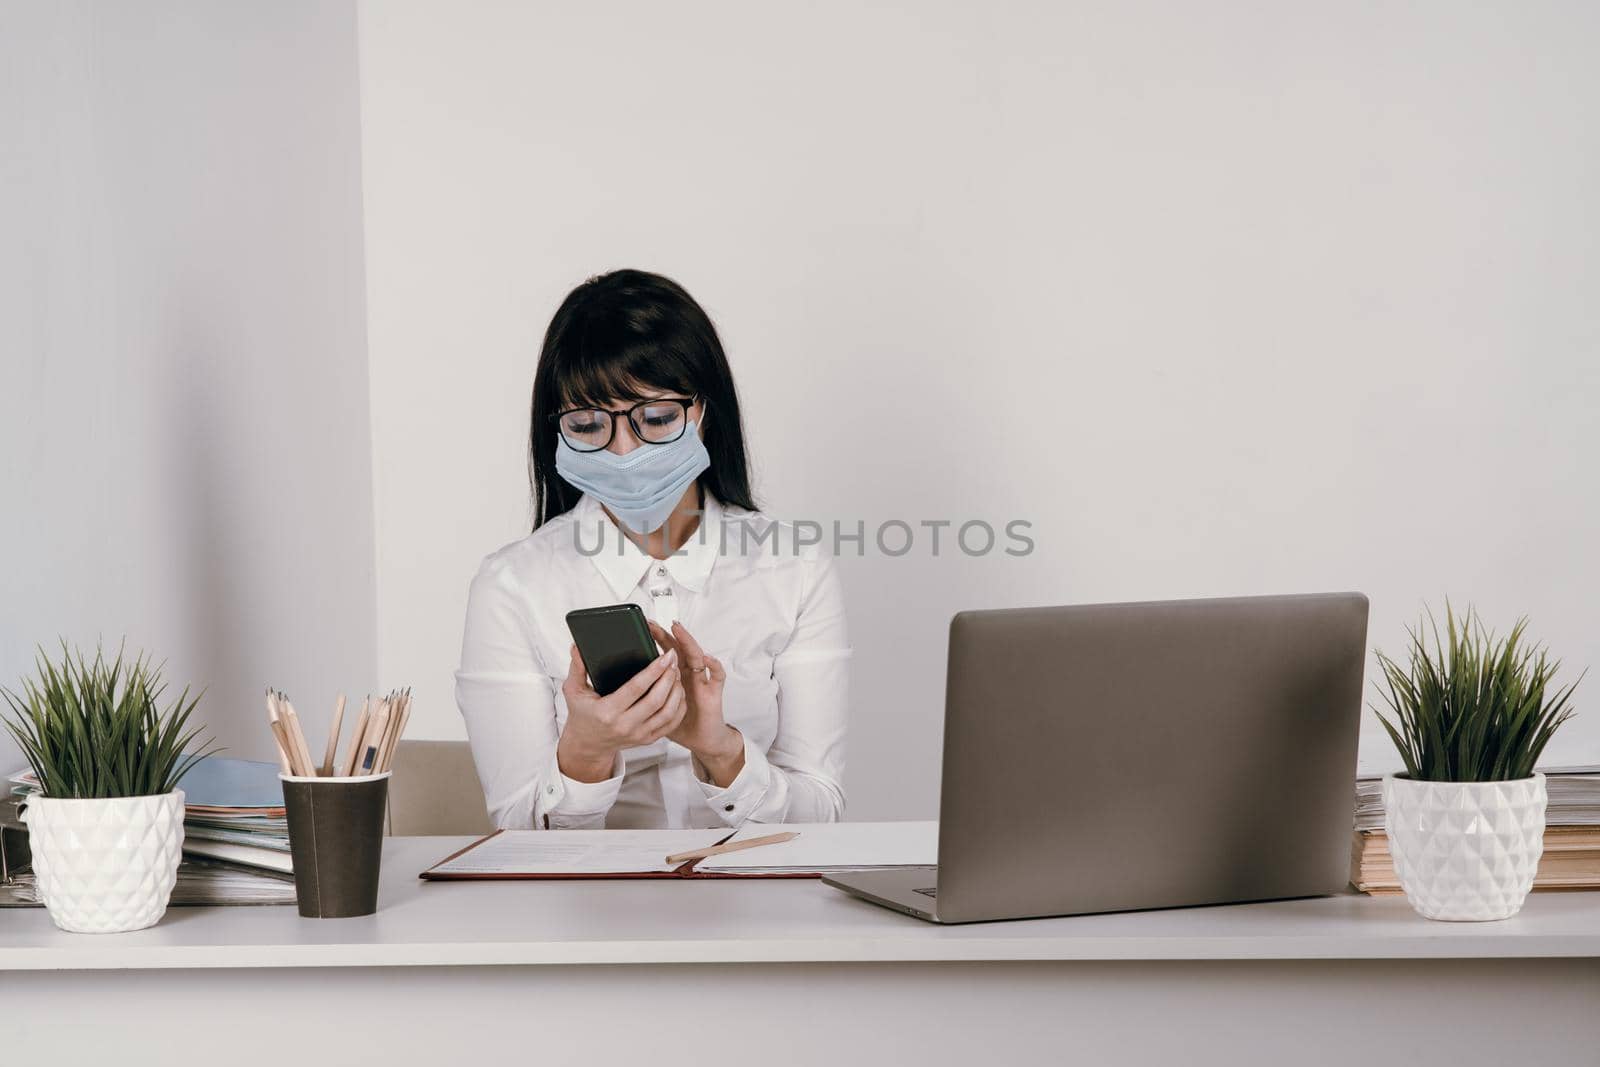 A young woman works remotely in the office with a protective mask during an epidemic. by zartarn